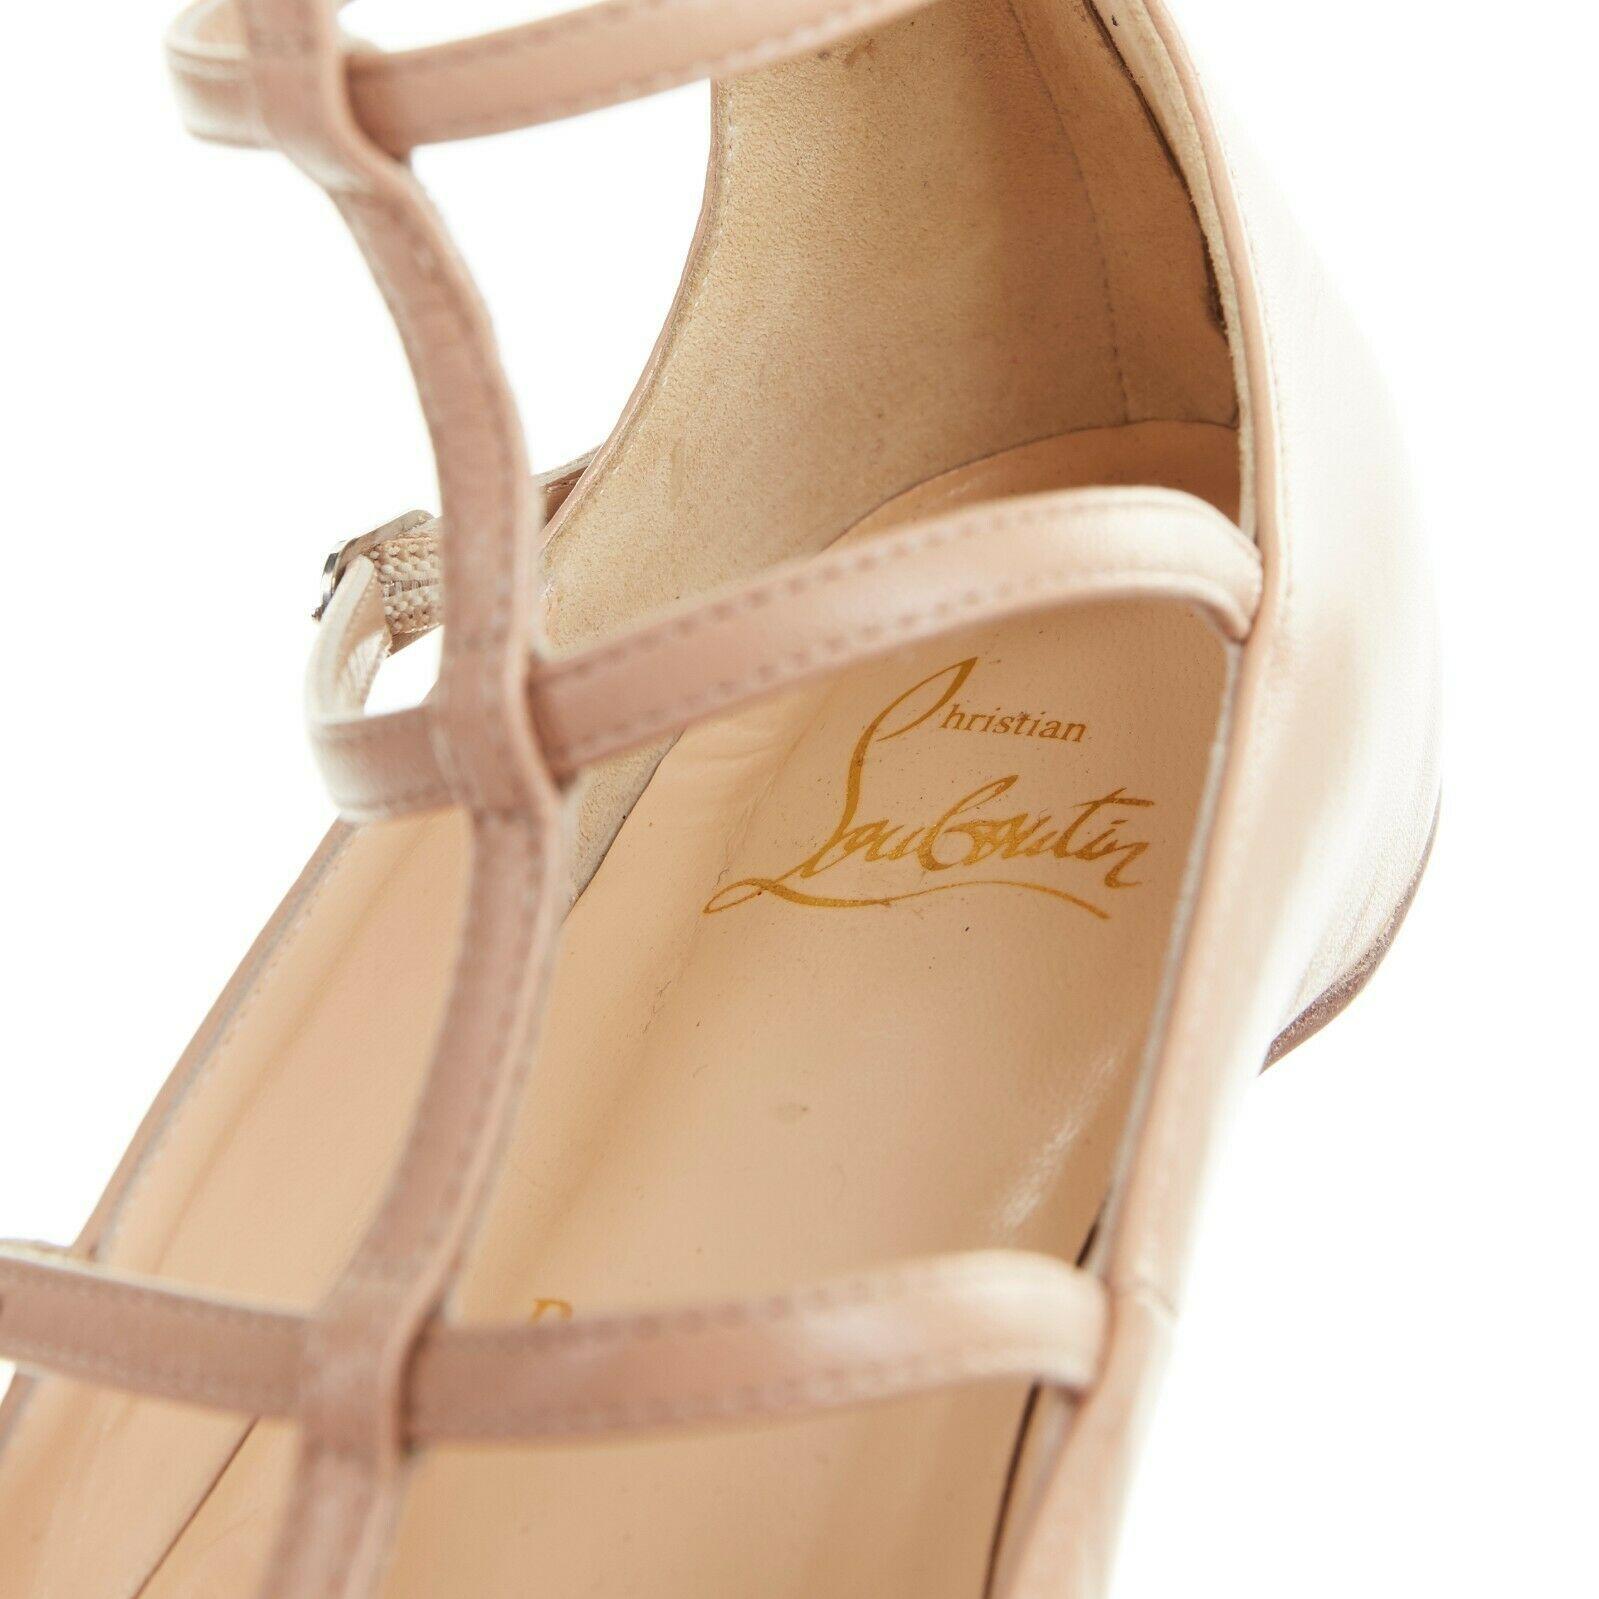 new CHRISTIAN LOUBOUTIN Toerless Muse nude point toe gladiator caged flats EU35 5